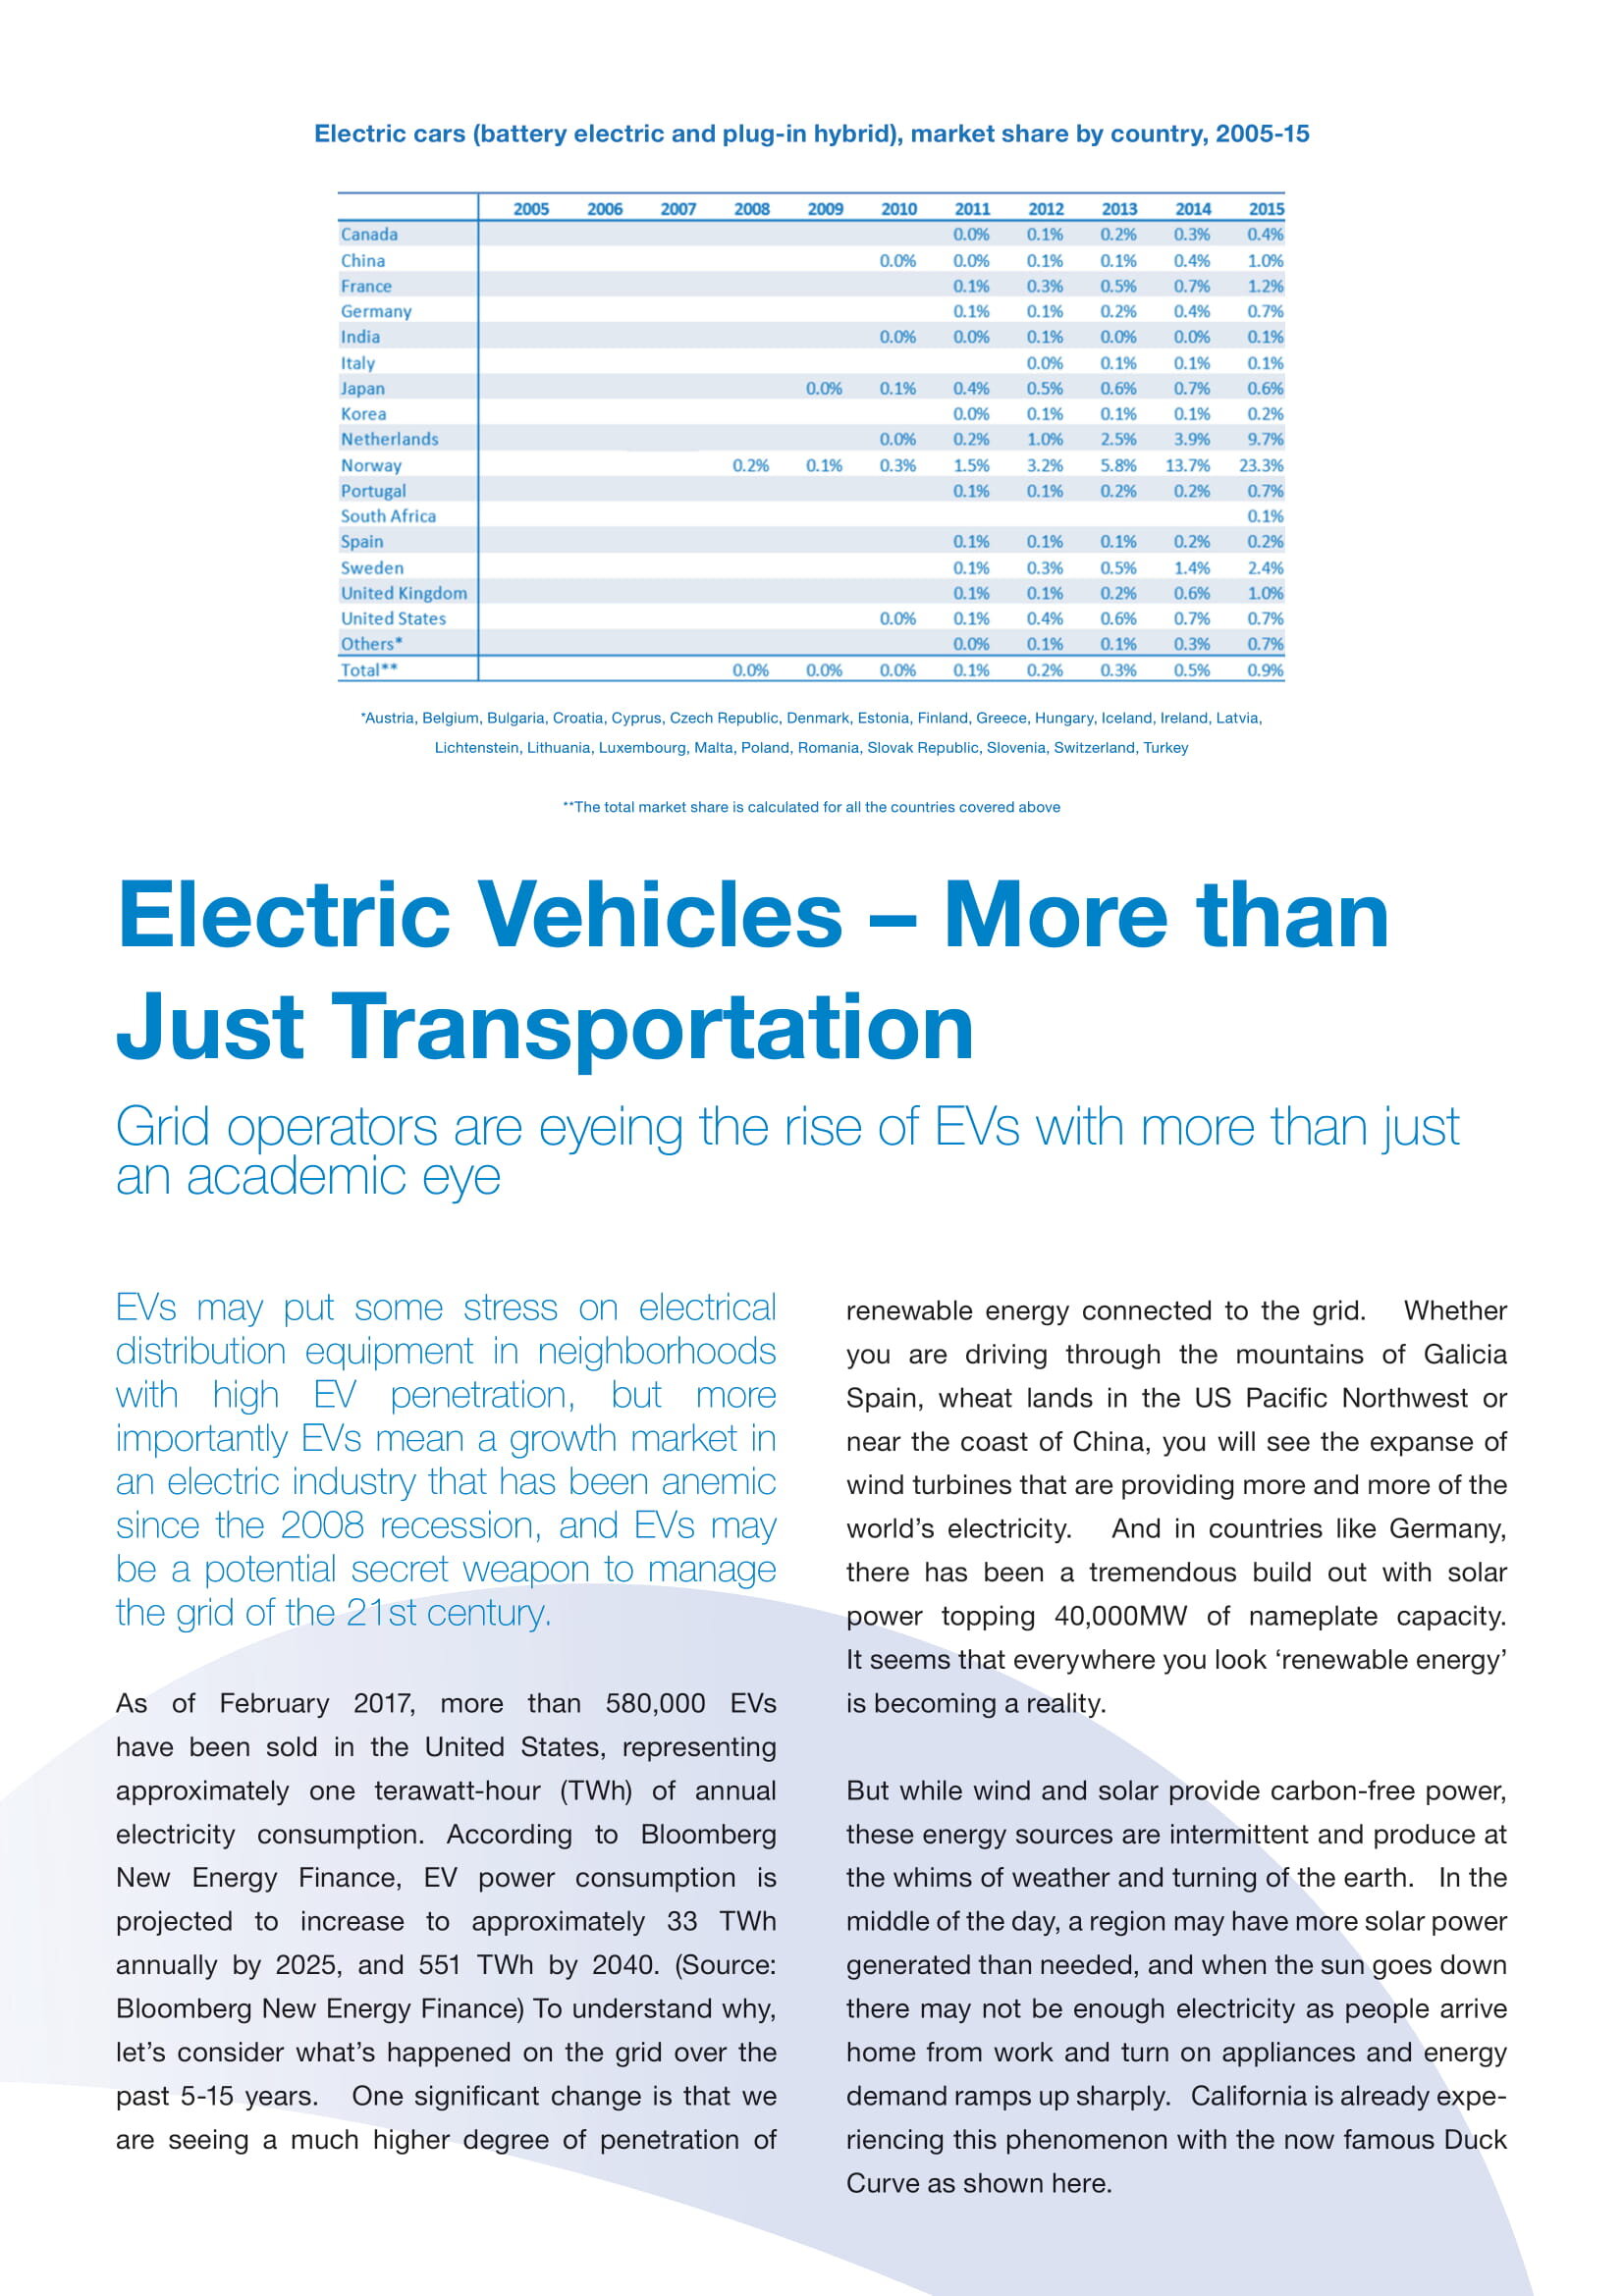 Electric Vehicles - a Killer App for Utilities-04.jpg